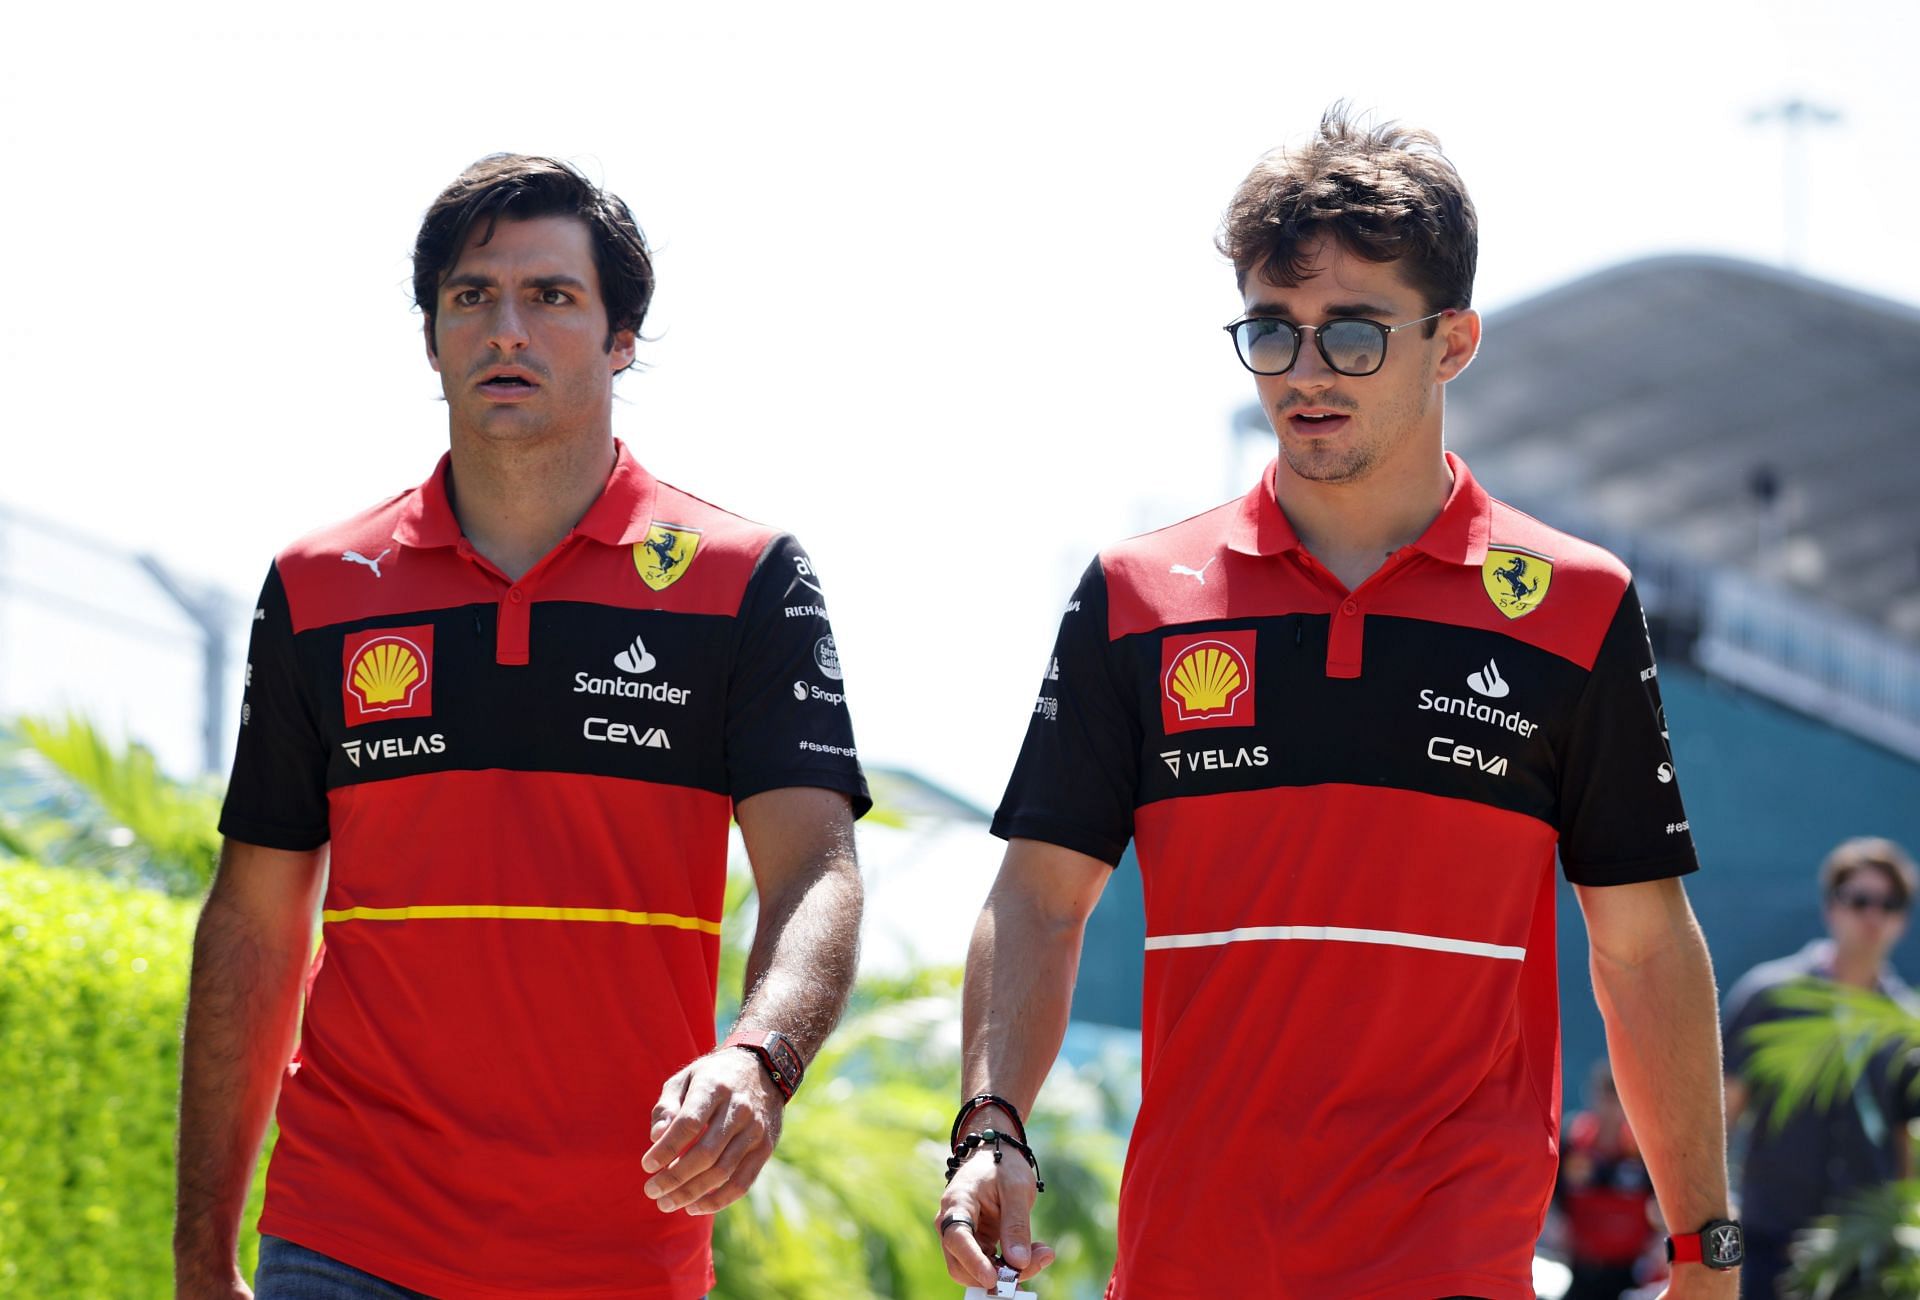 Ferrari drivers Carlos Sainz (left) and Charles Leclerc (right) ahead of the 2022 F1 Miami GP. (Photo by Mark Thompson/Getty Images)